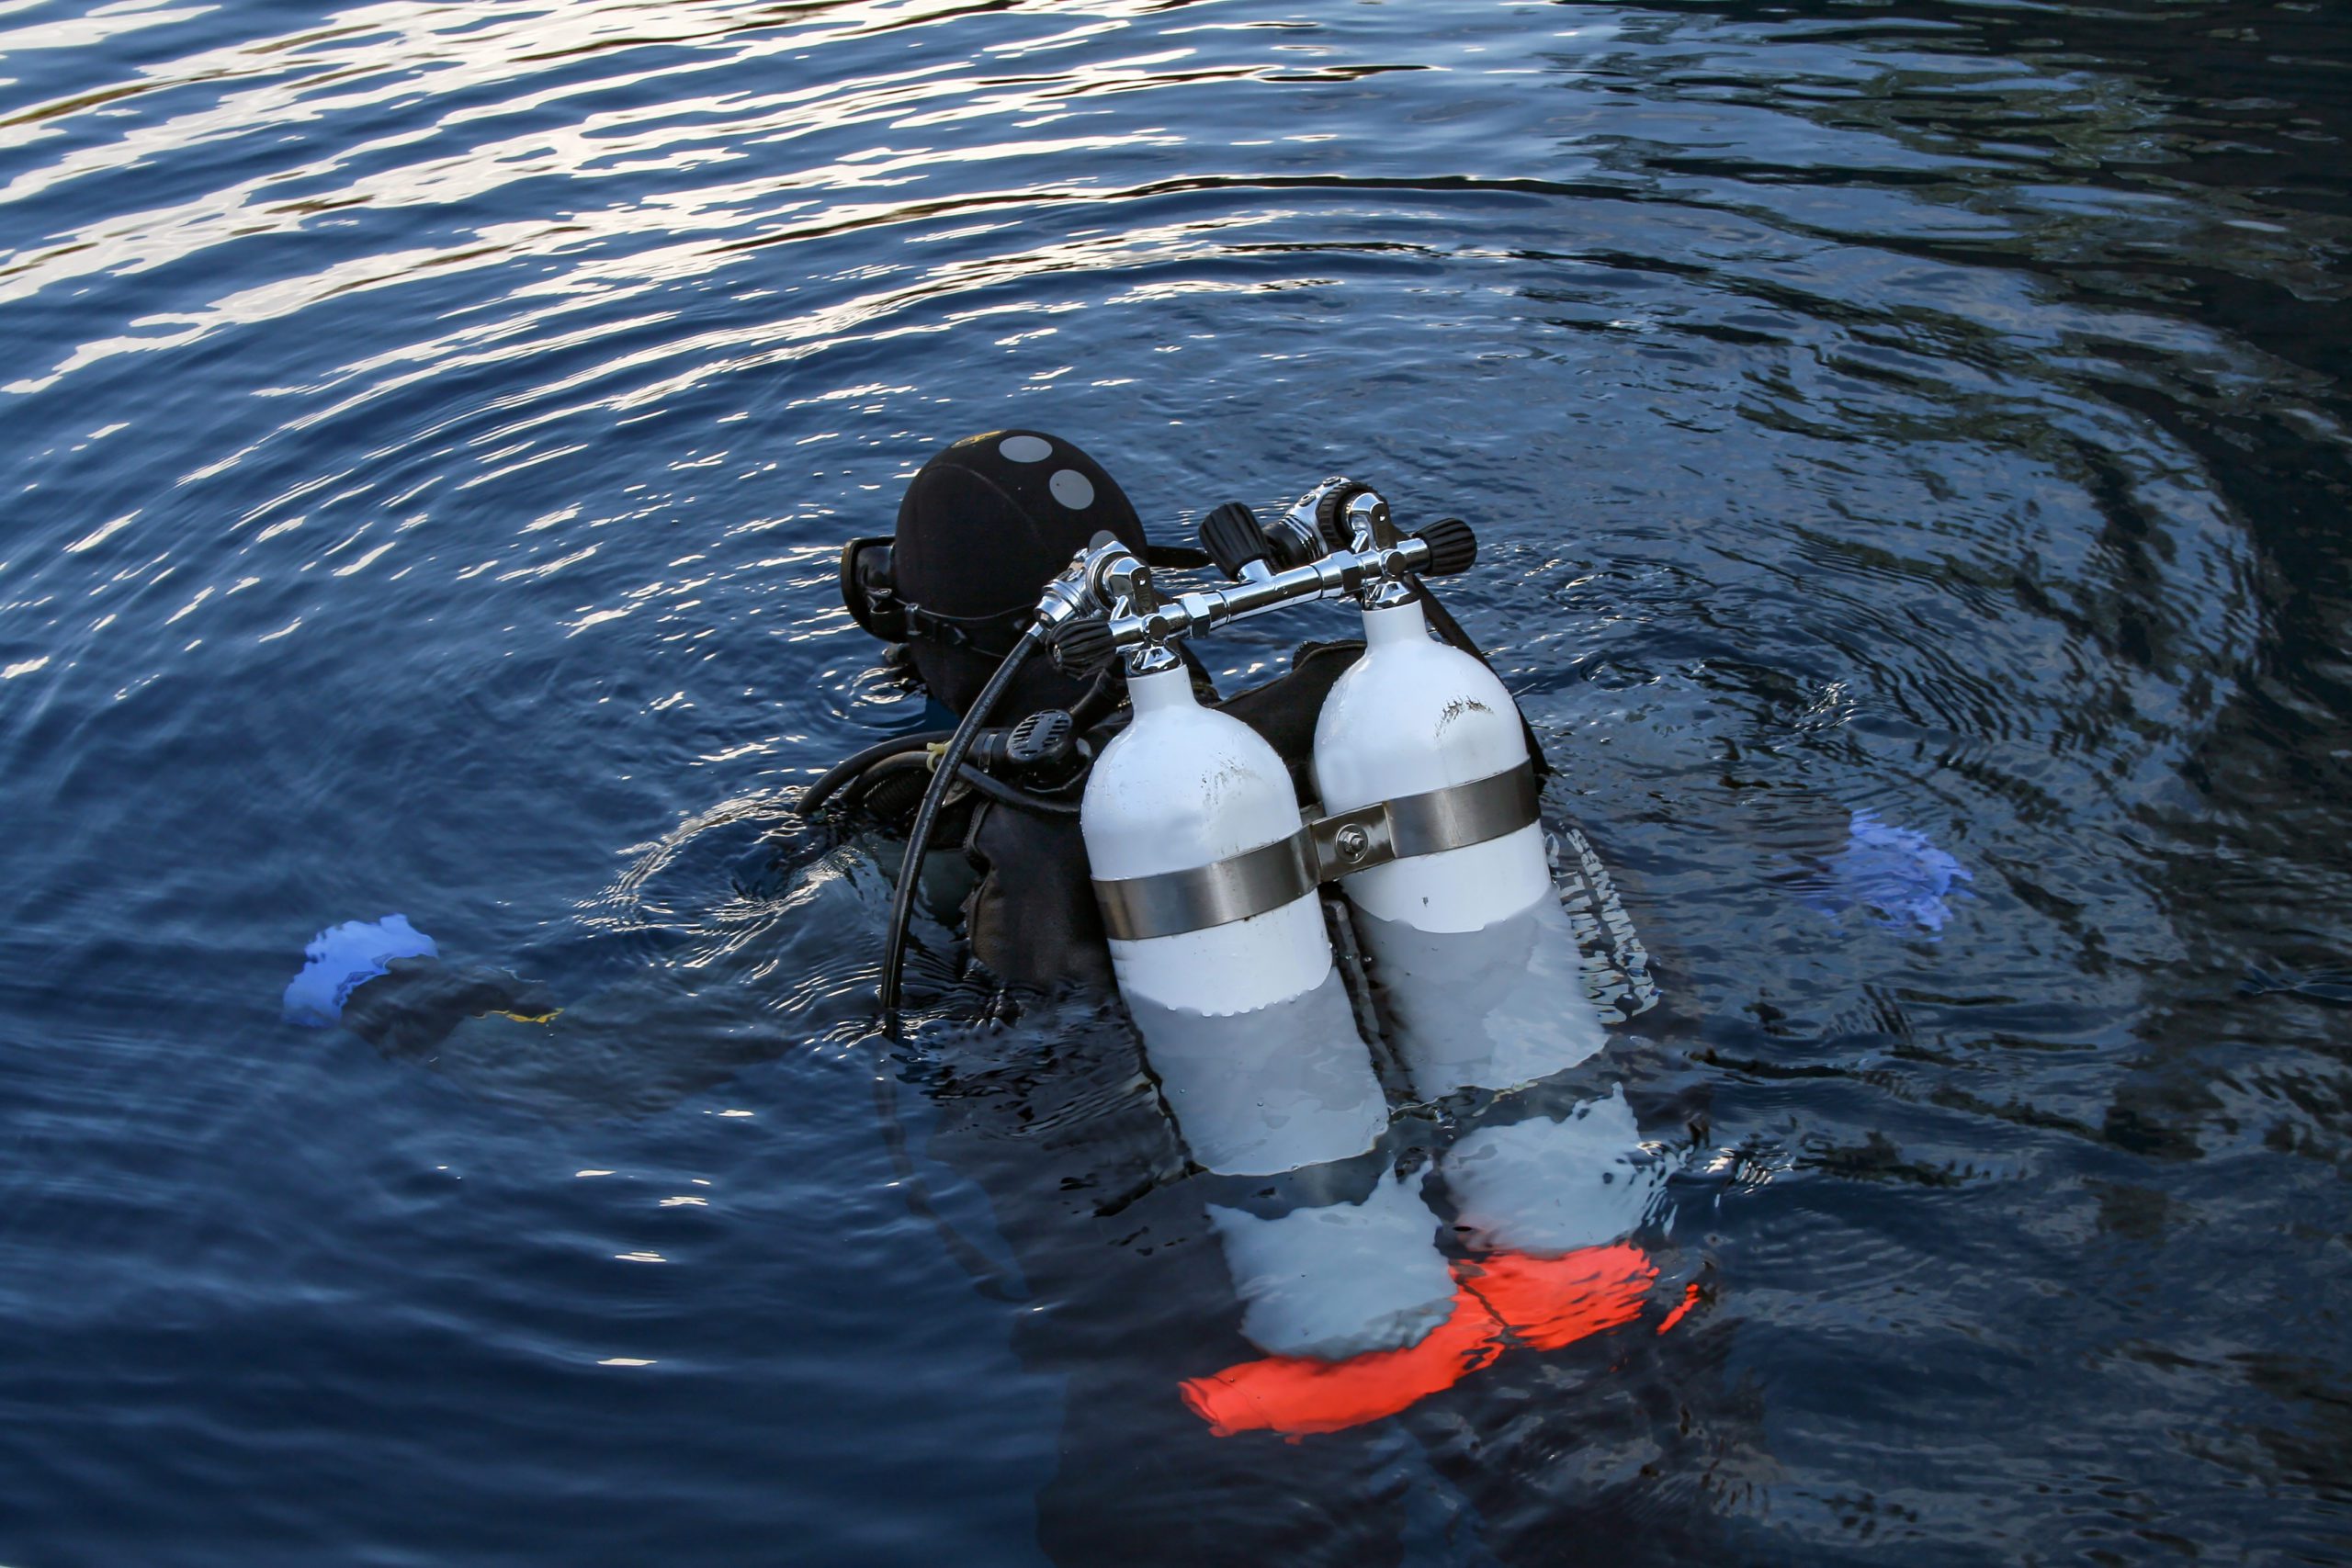 Diver plunges into the dark water deep lake